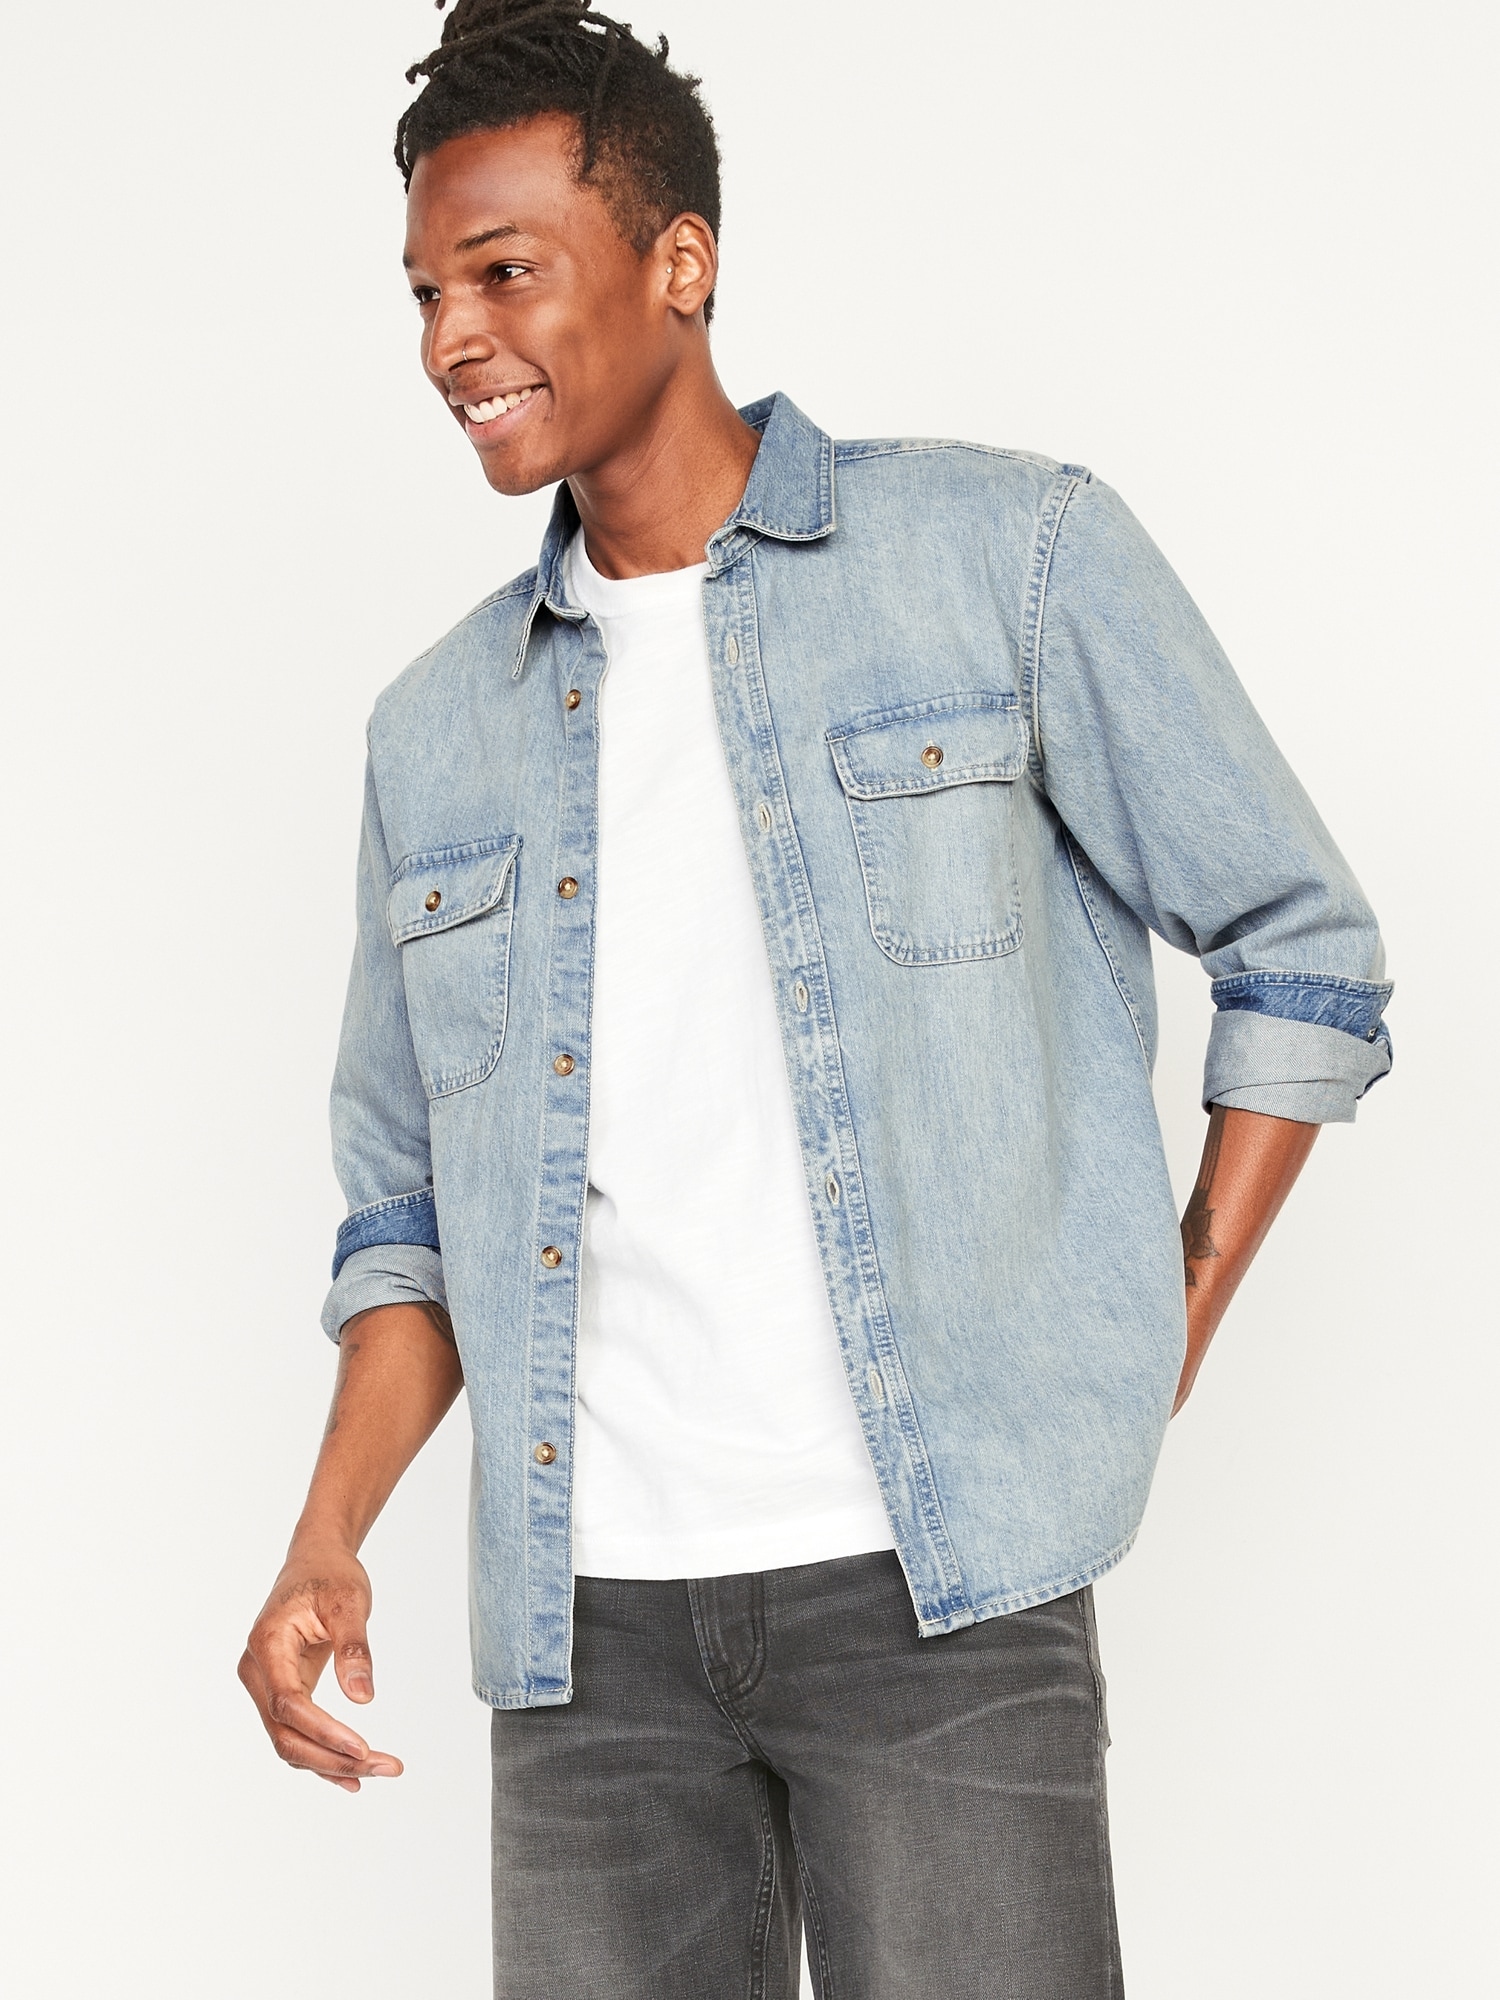 Gender-Neutral Long-Sleeve Jean Workwear Shirt for Adults | Old Navy